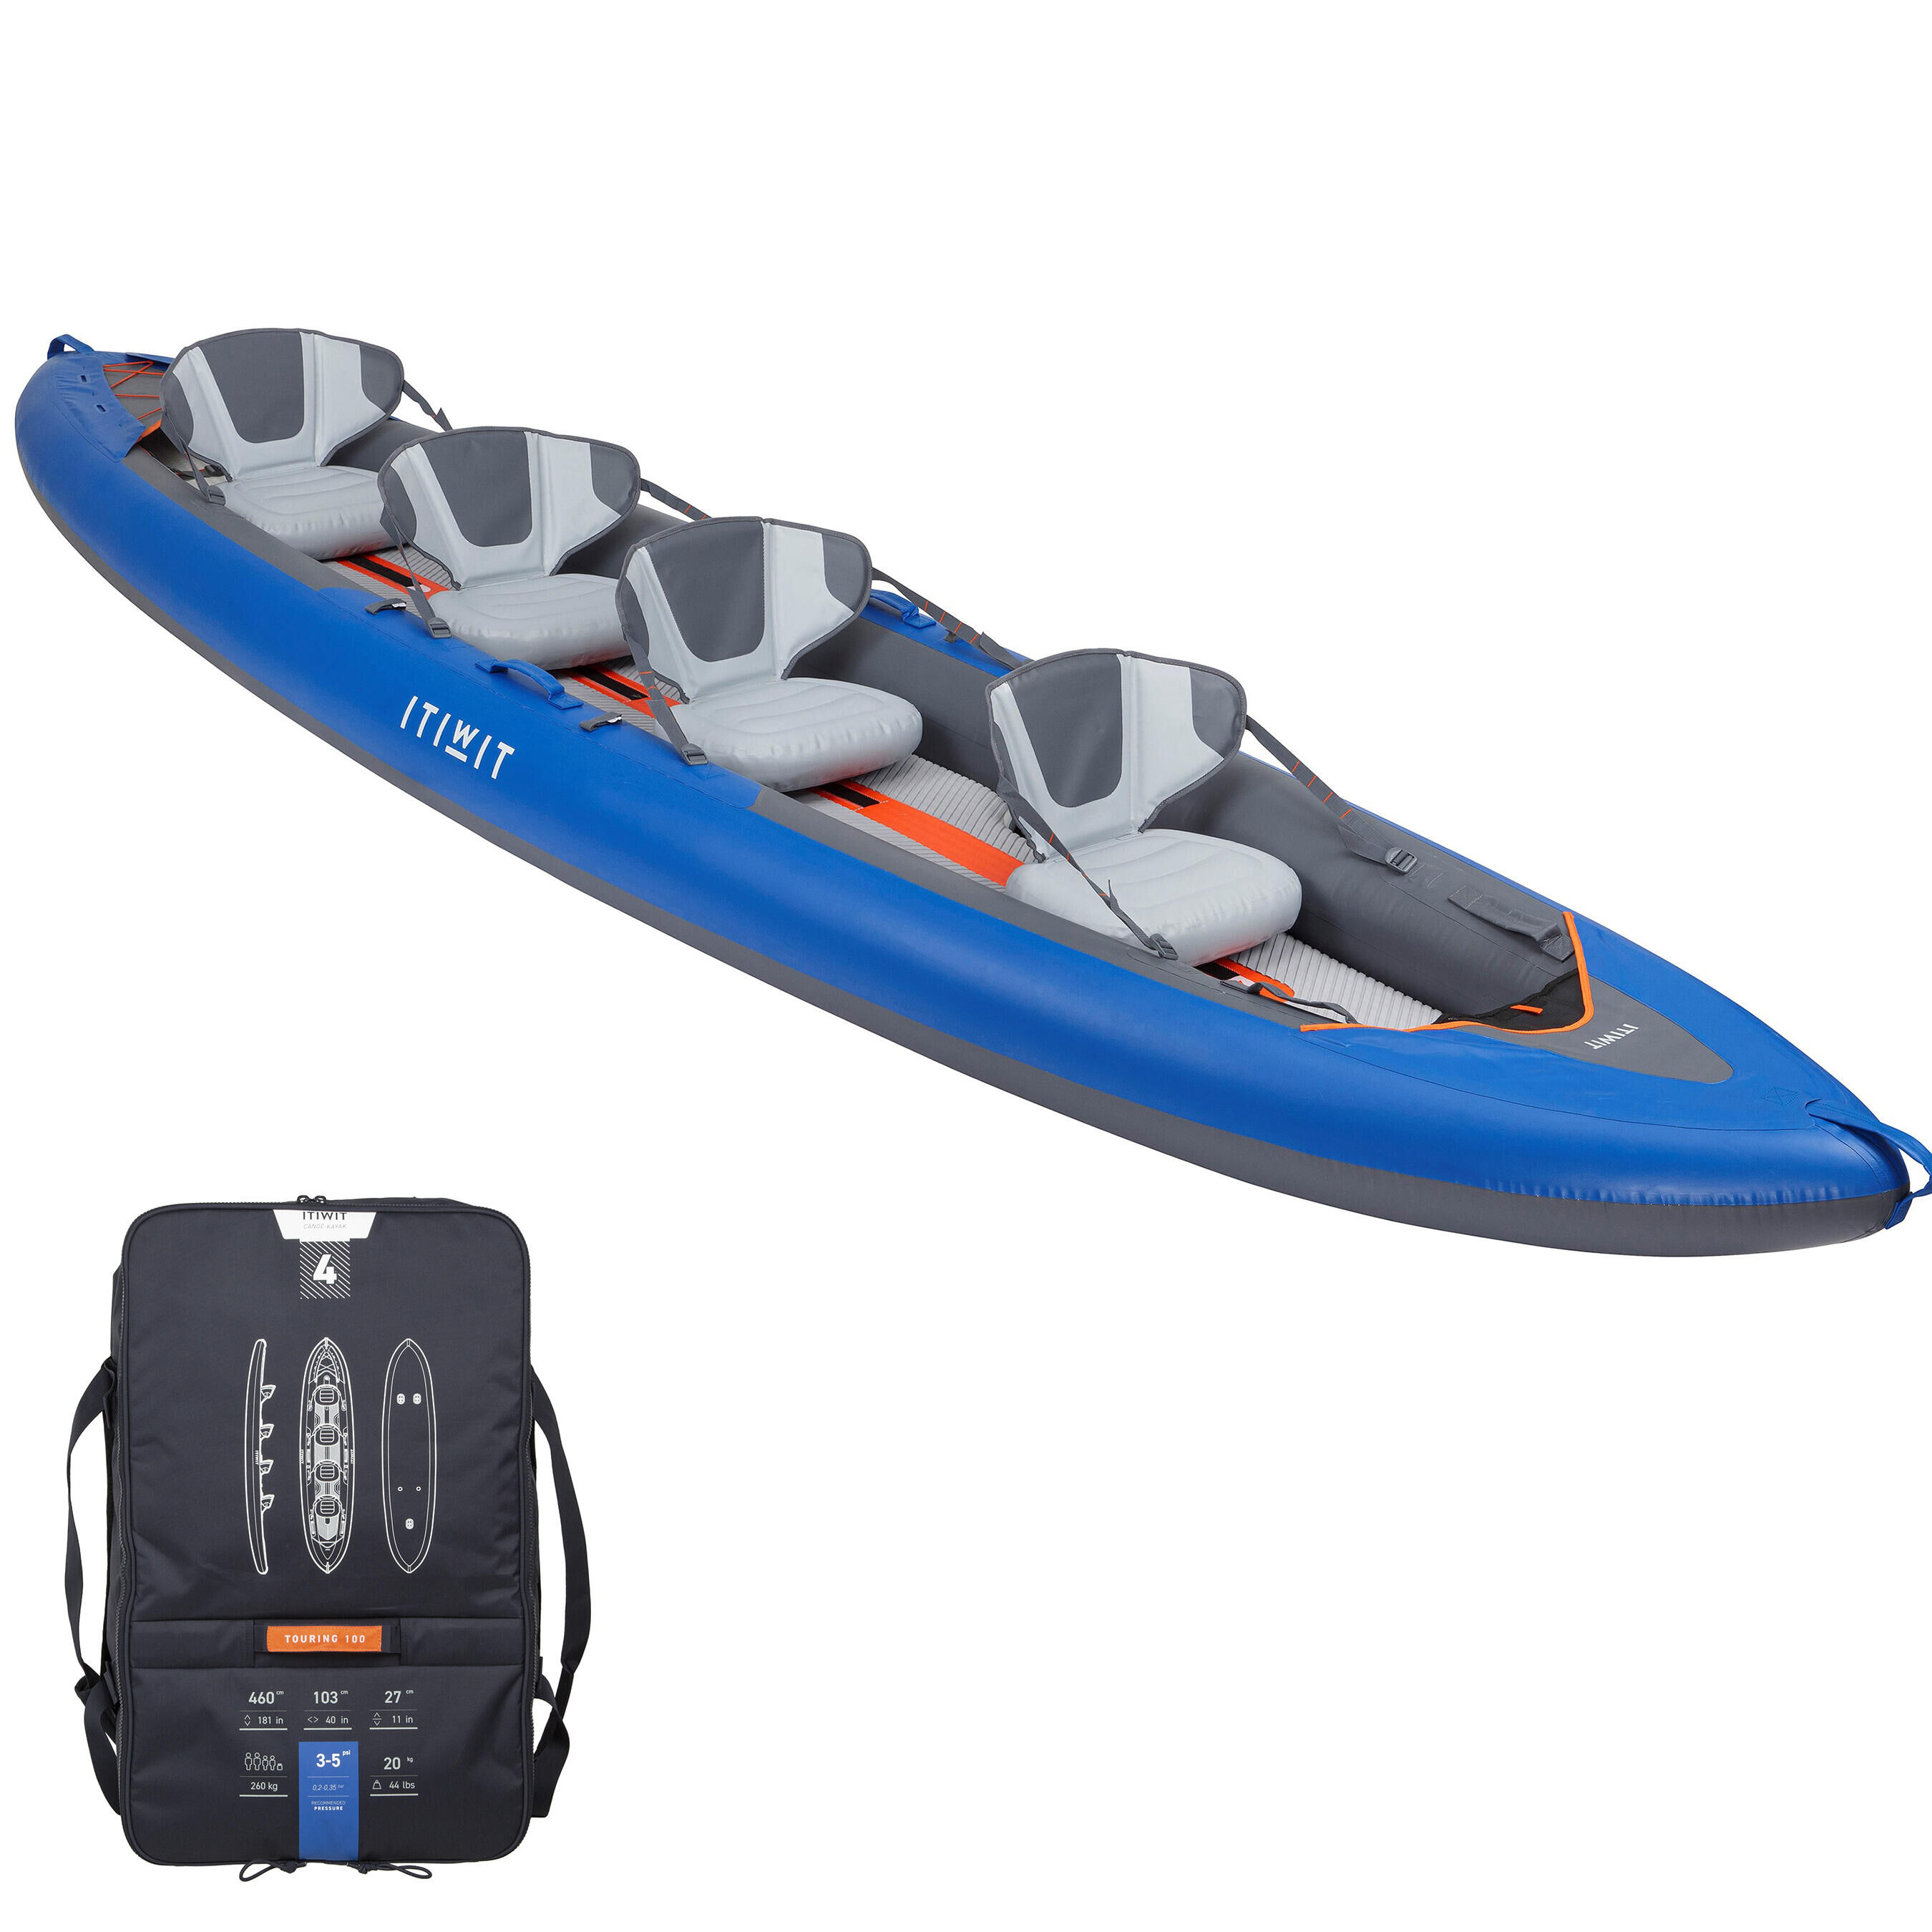 ITIWIT Inflatable 4 person touring Kayak High Pressure Bottom - X100+